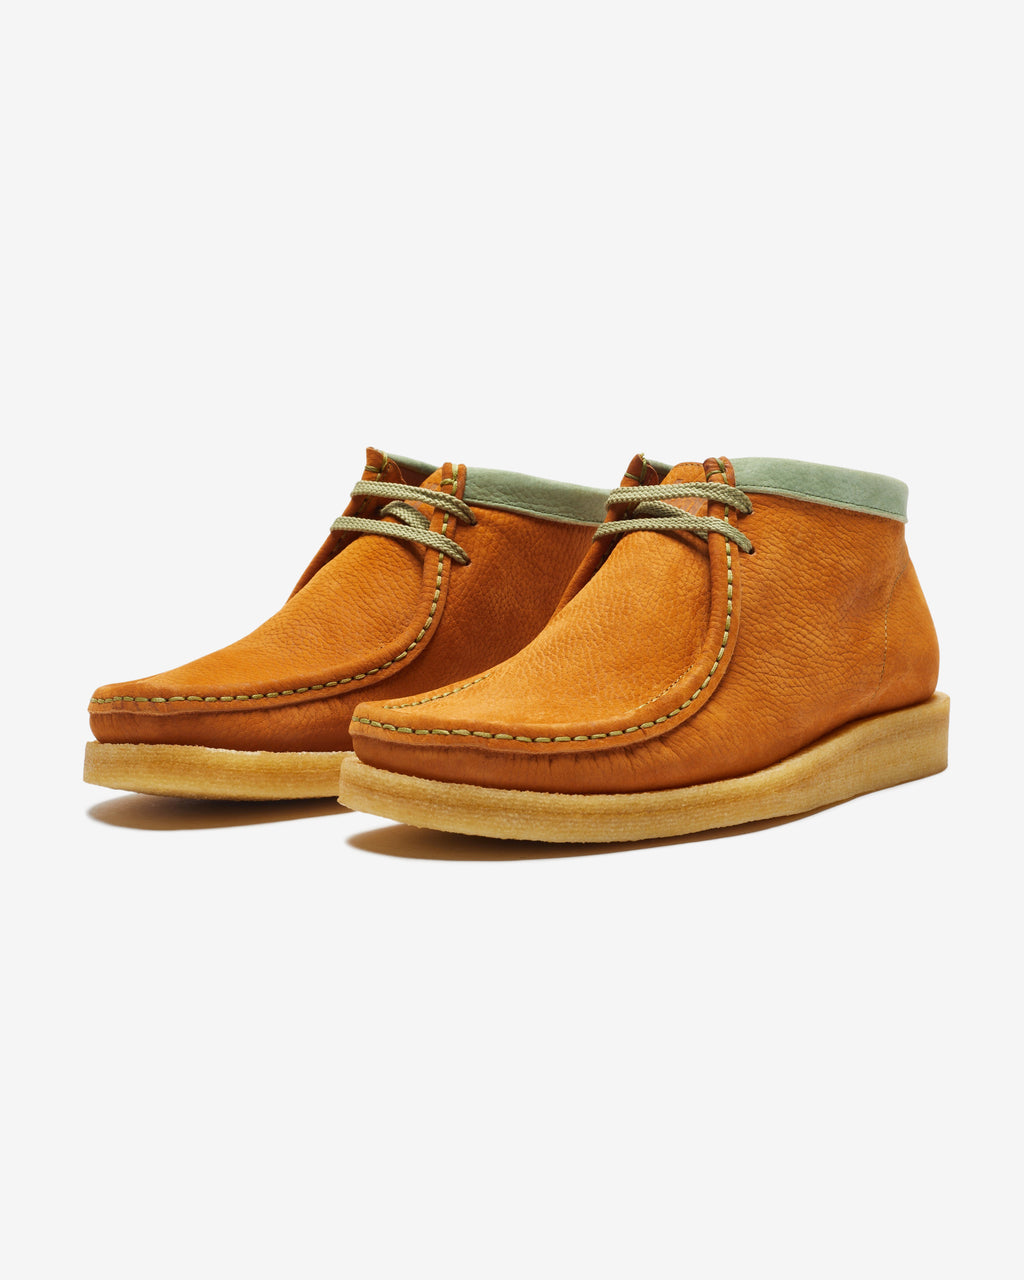 UNDEFEATED X PADMORE & BARNES P404 ORIGINAL BOOT - BROWN